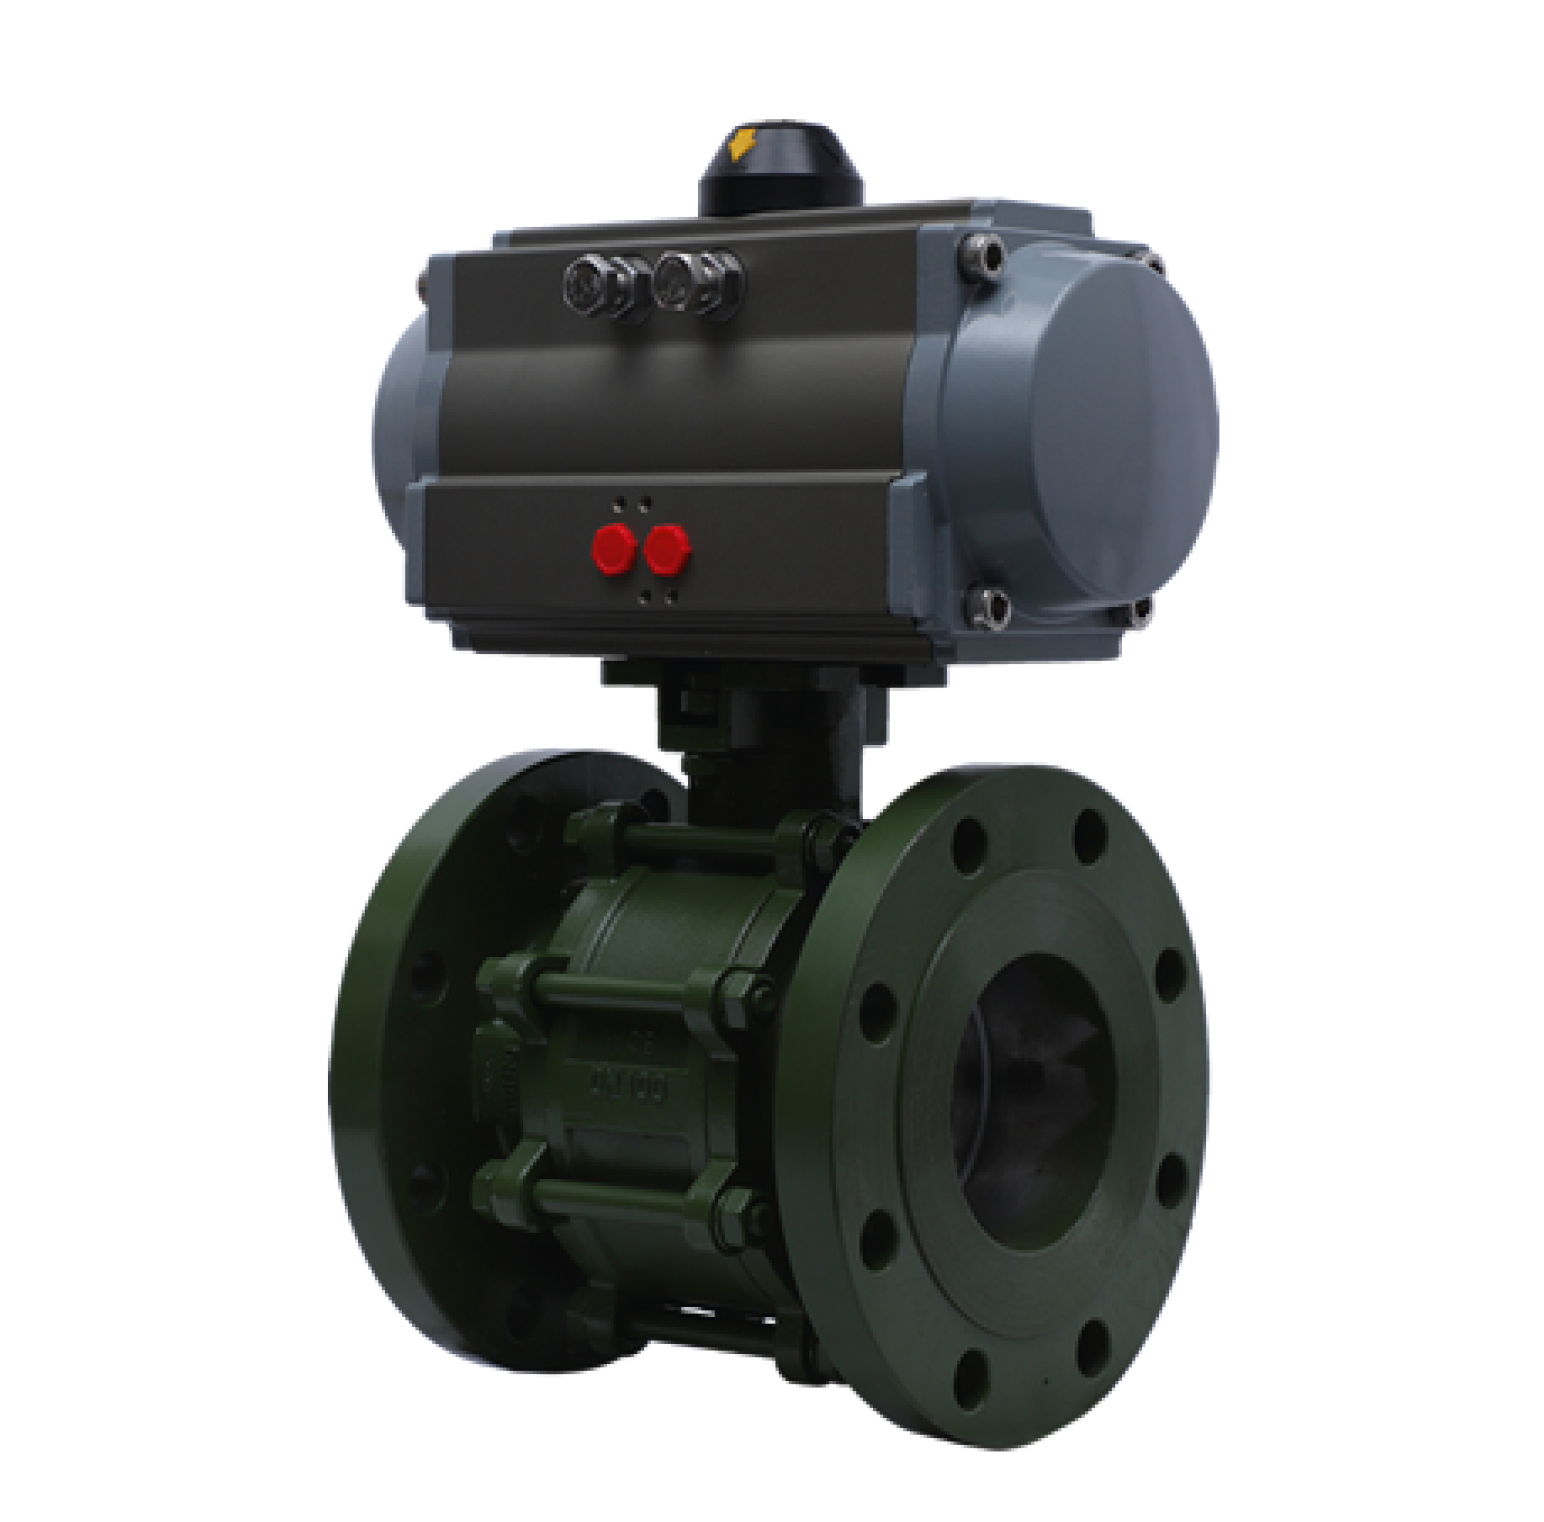 Global Valve Automation - Automation - Pneumatic and Electric Actuator operated ball valve 2 way and 3 way